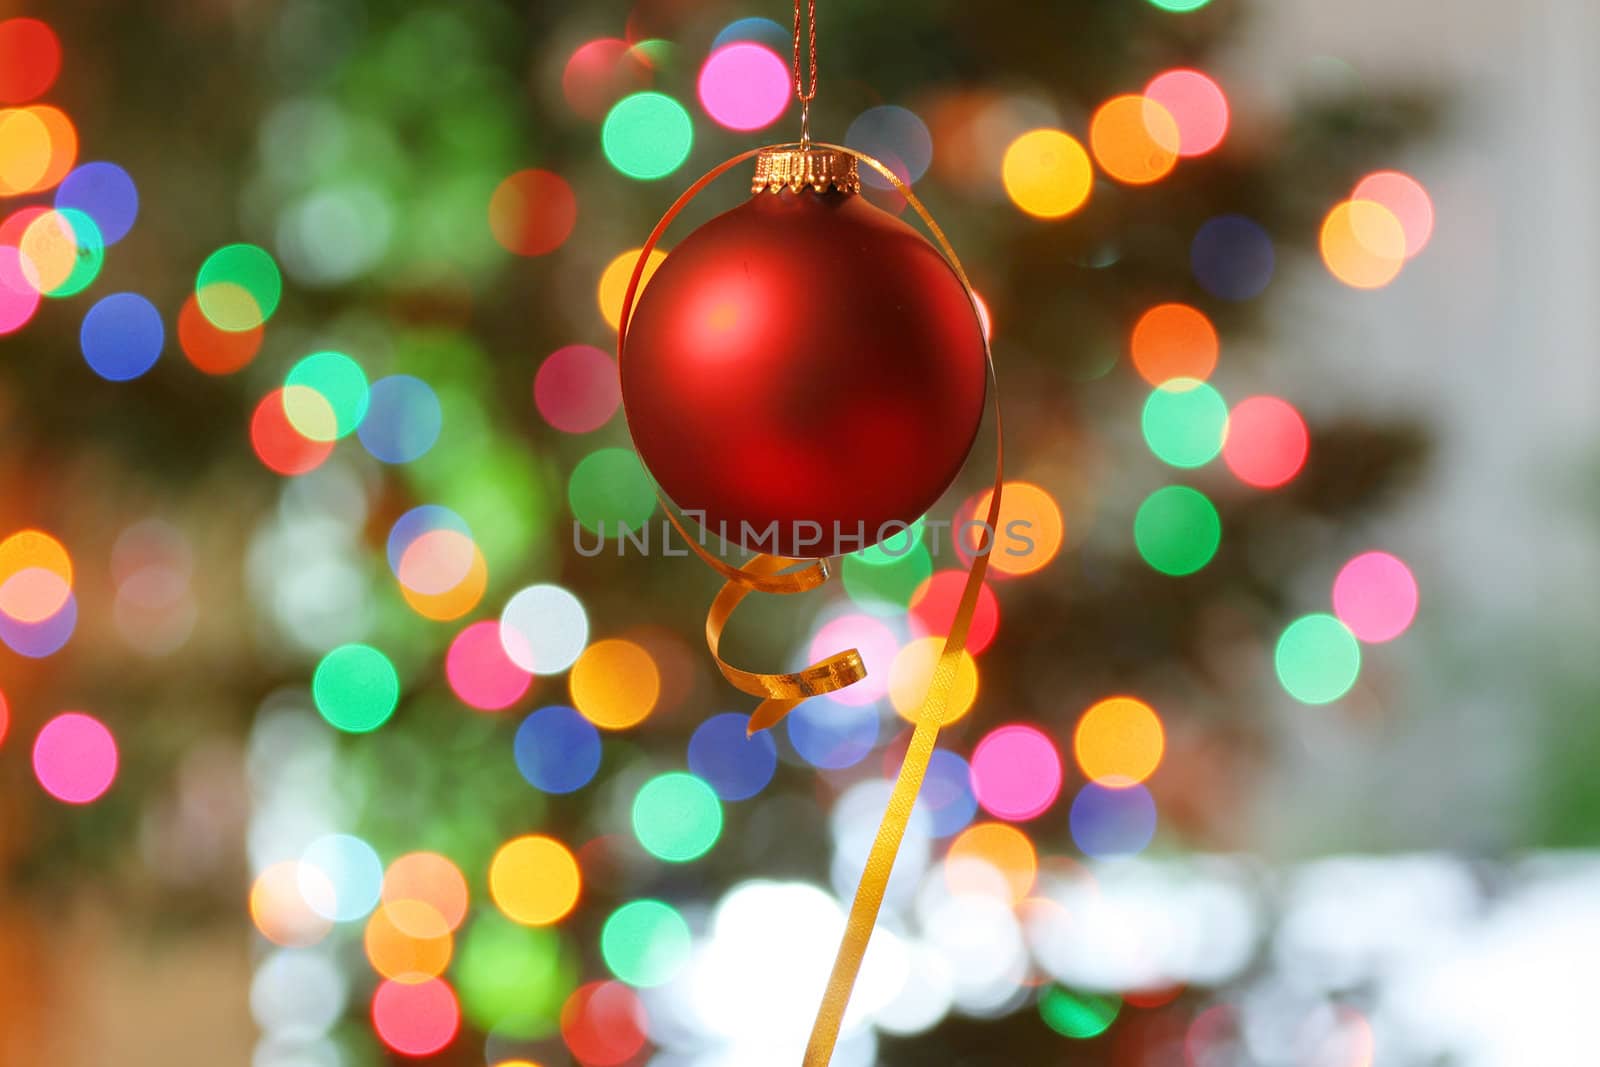 Red frosted Christmas ornament with colorful lights in background.